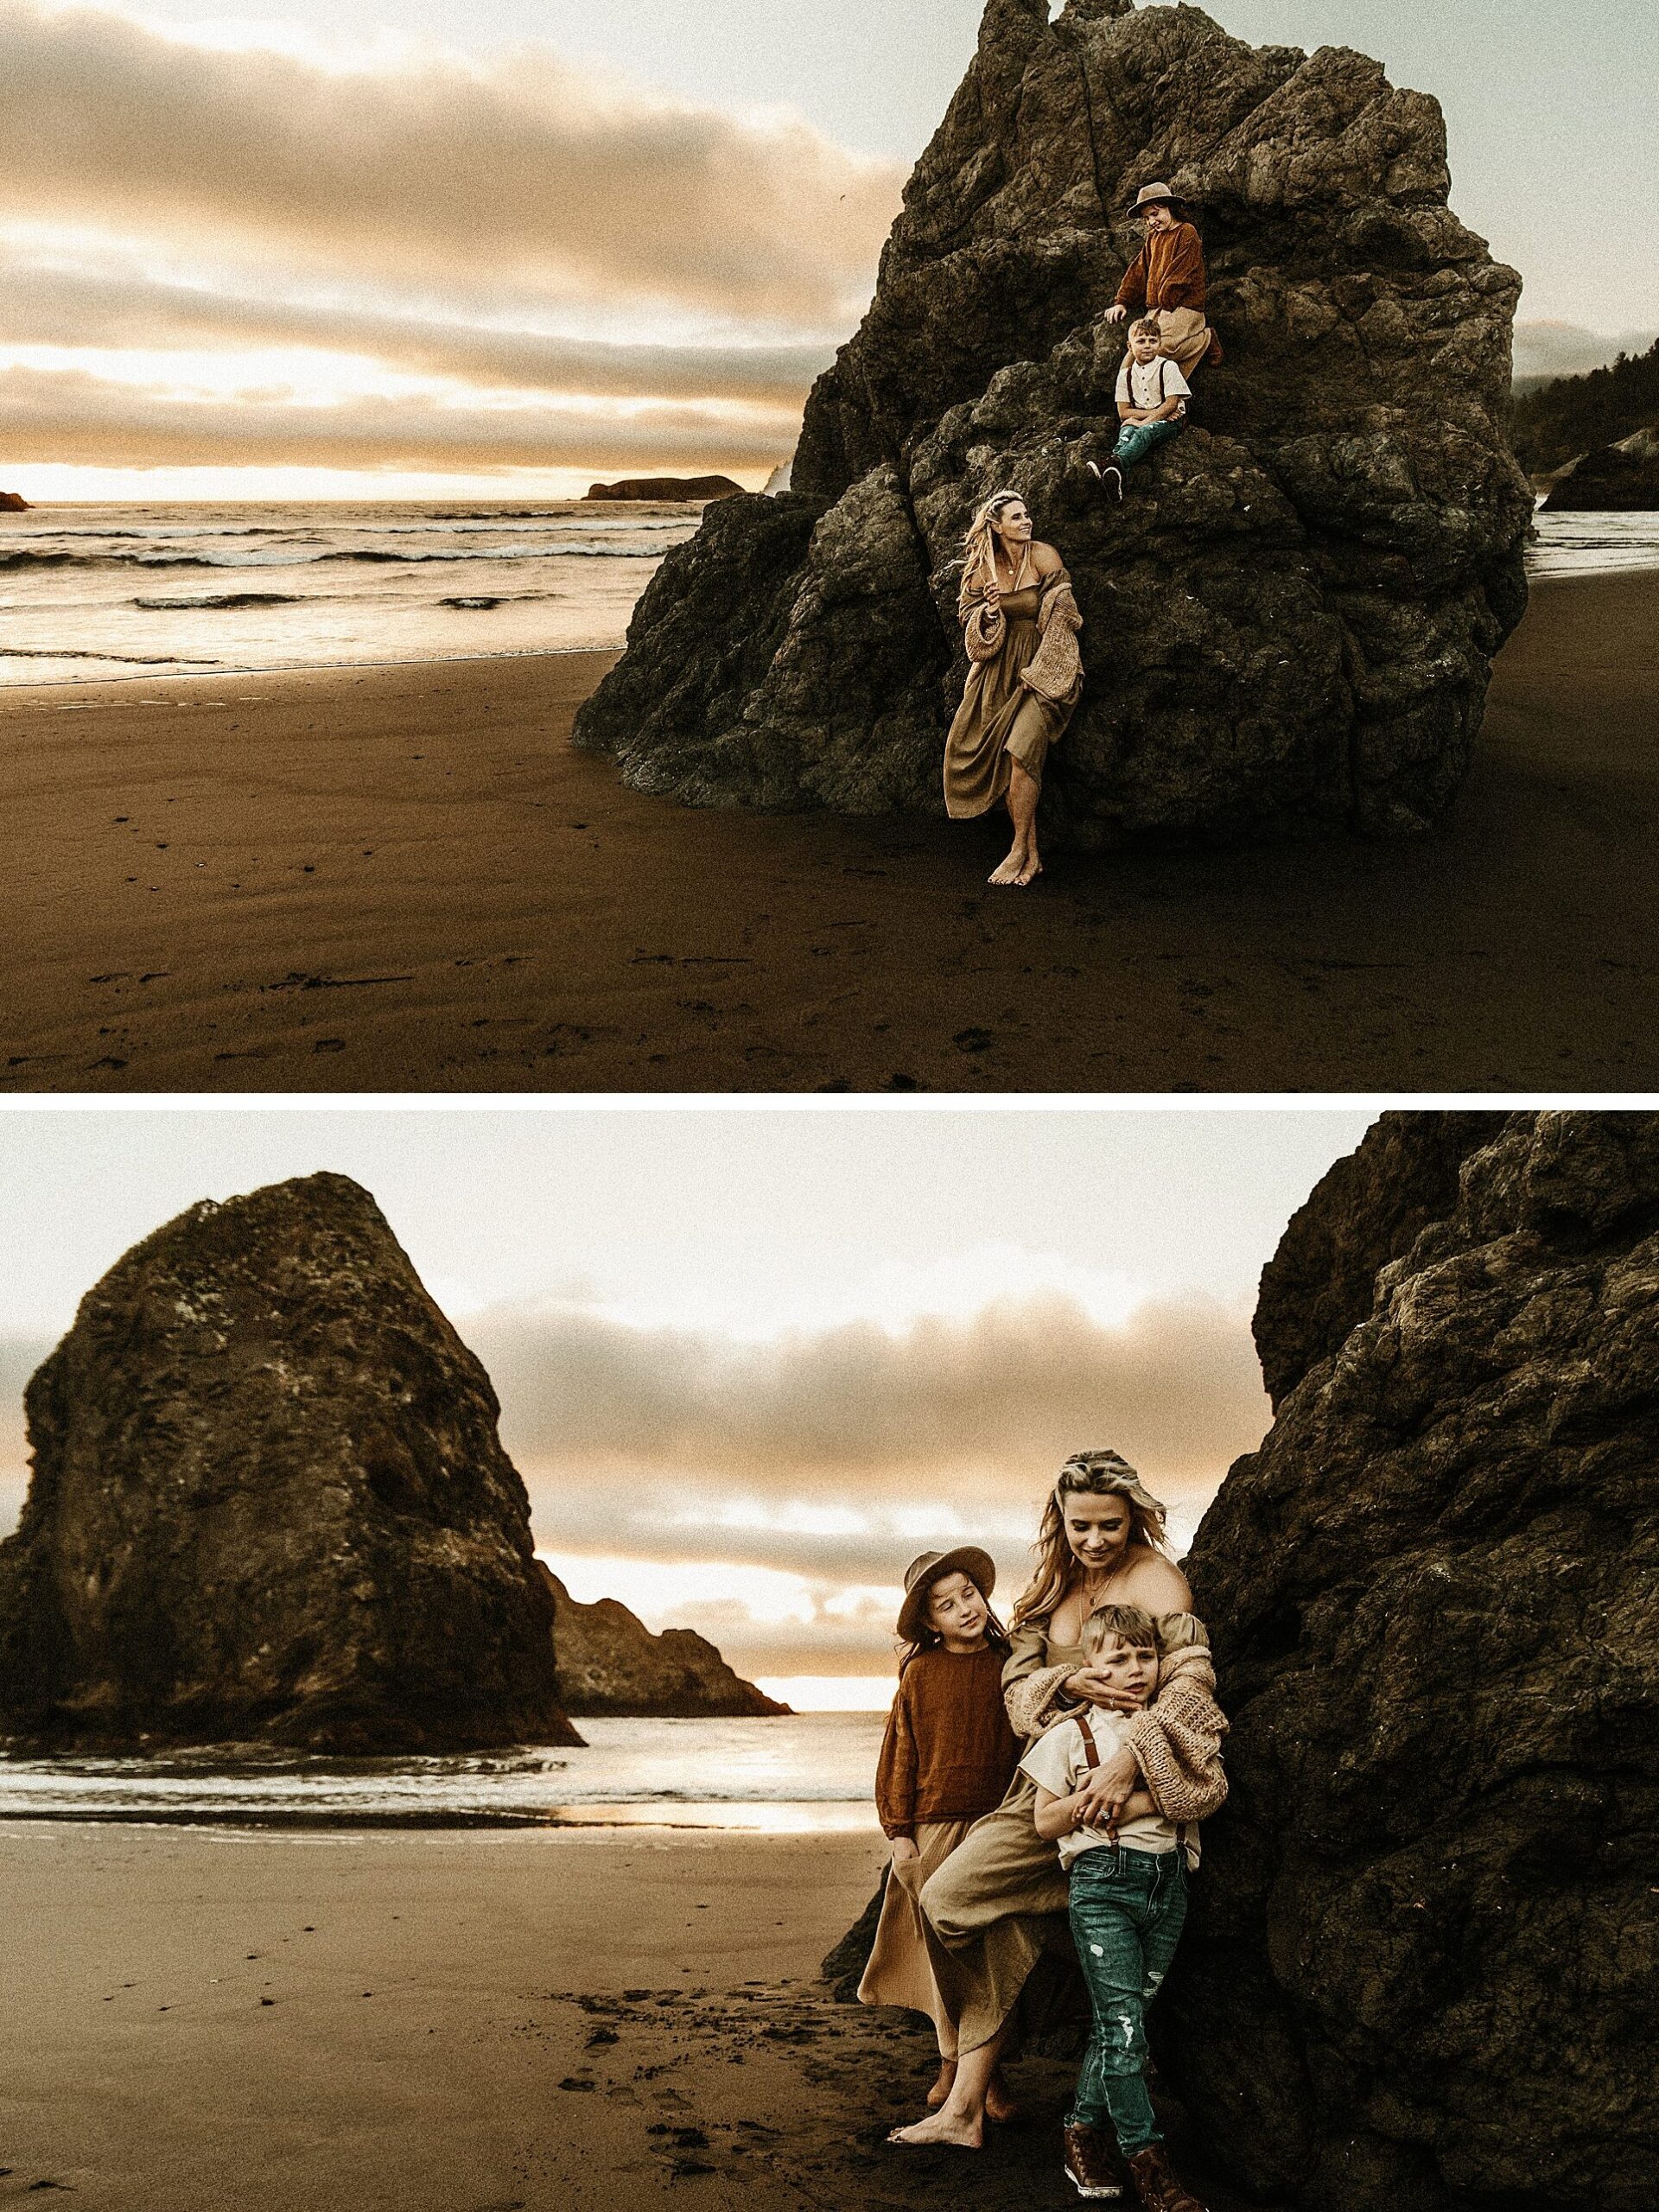 mother and her two children spending time at outdoor family session on Oregon beach at Stormy Solis workshop Rebecca Stephenson fine art family photographer St Louis Missouri